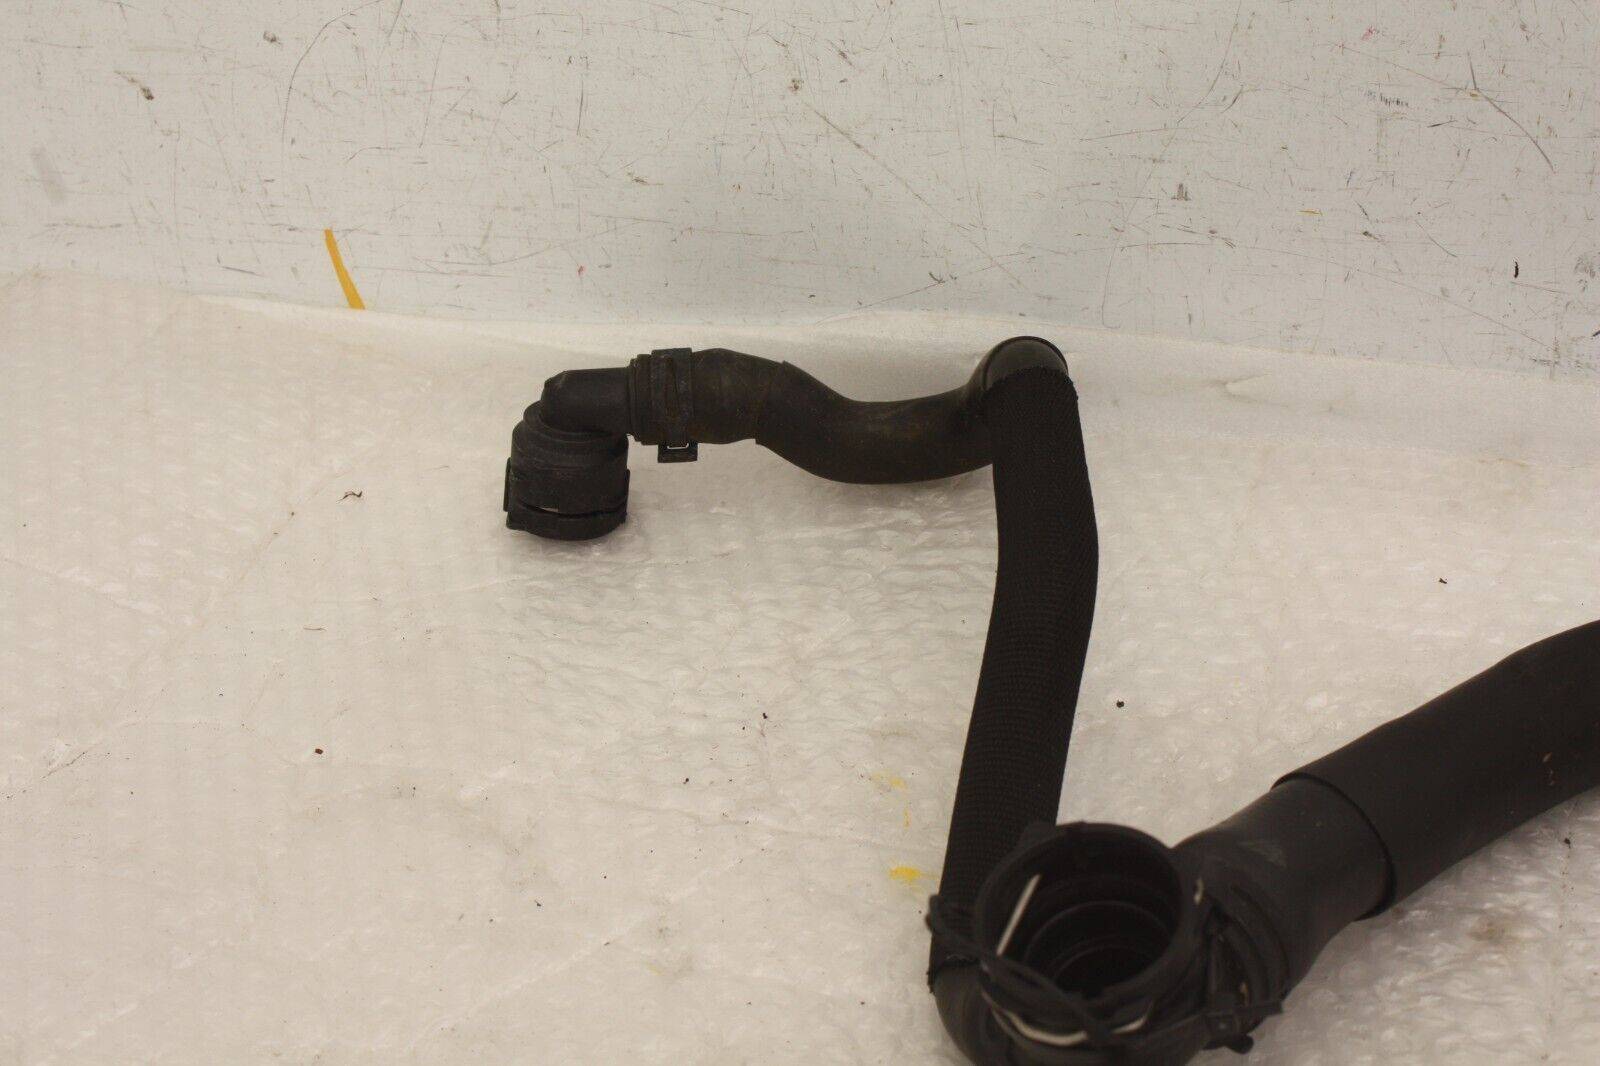 VW-Golf-Water-Coolant-Pipes-Hose-5Q0122101-Genuine-176375079536-6